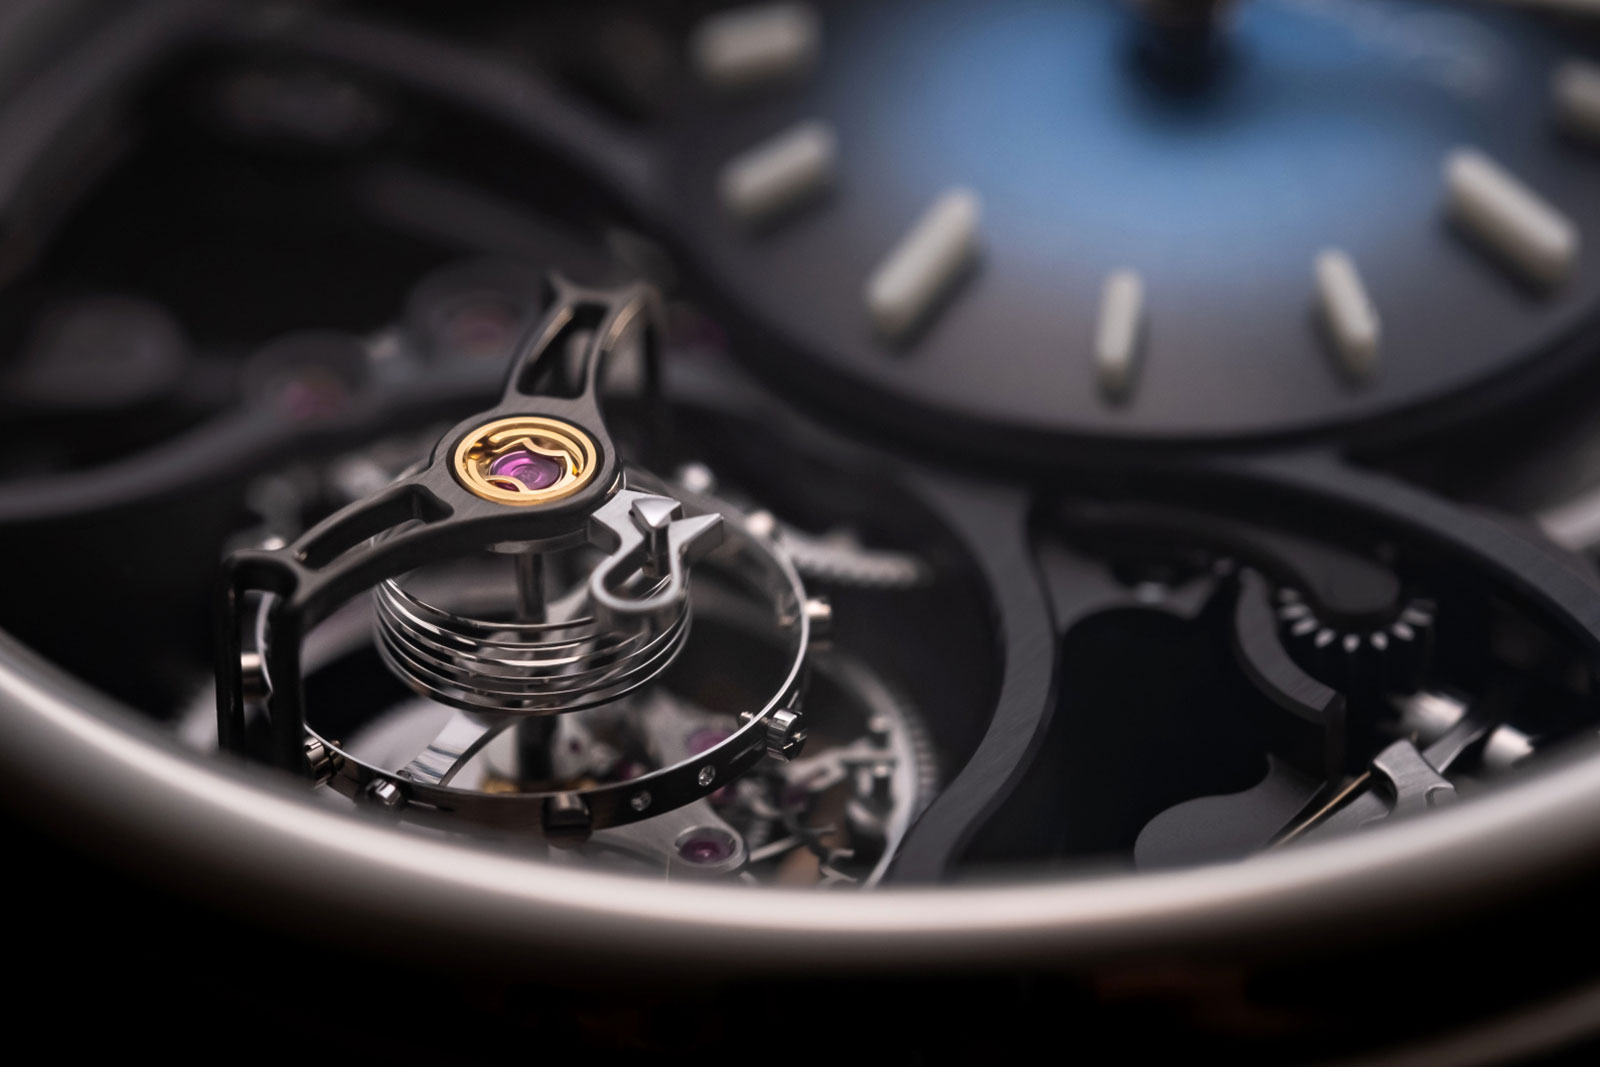 H. Moser & Cie. Introduces the Pioneer Cylindrical Tourbillon Skeleton |  SJX Watches